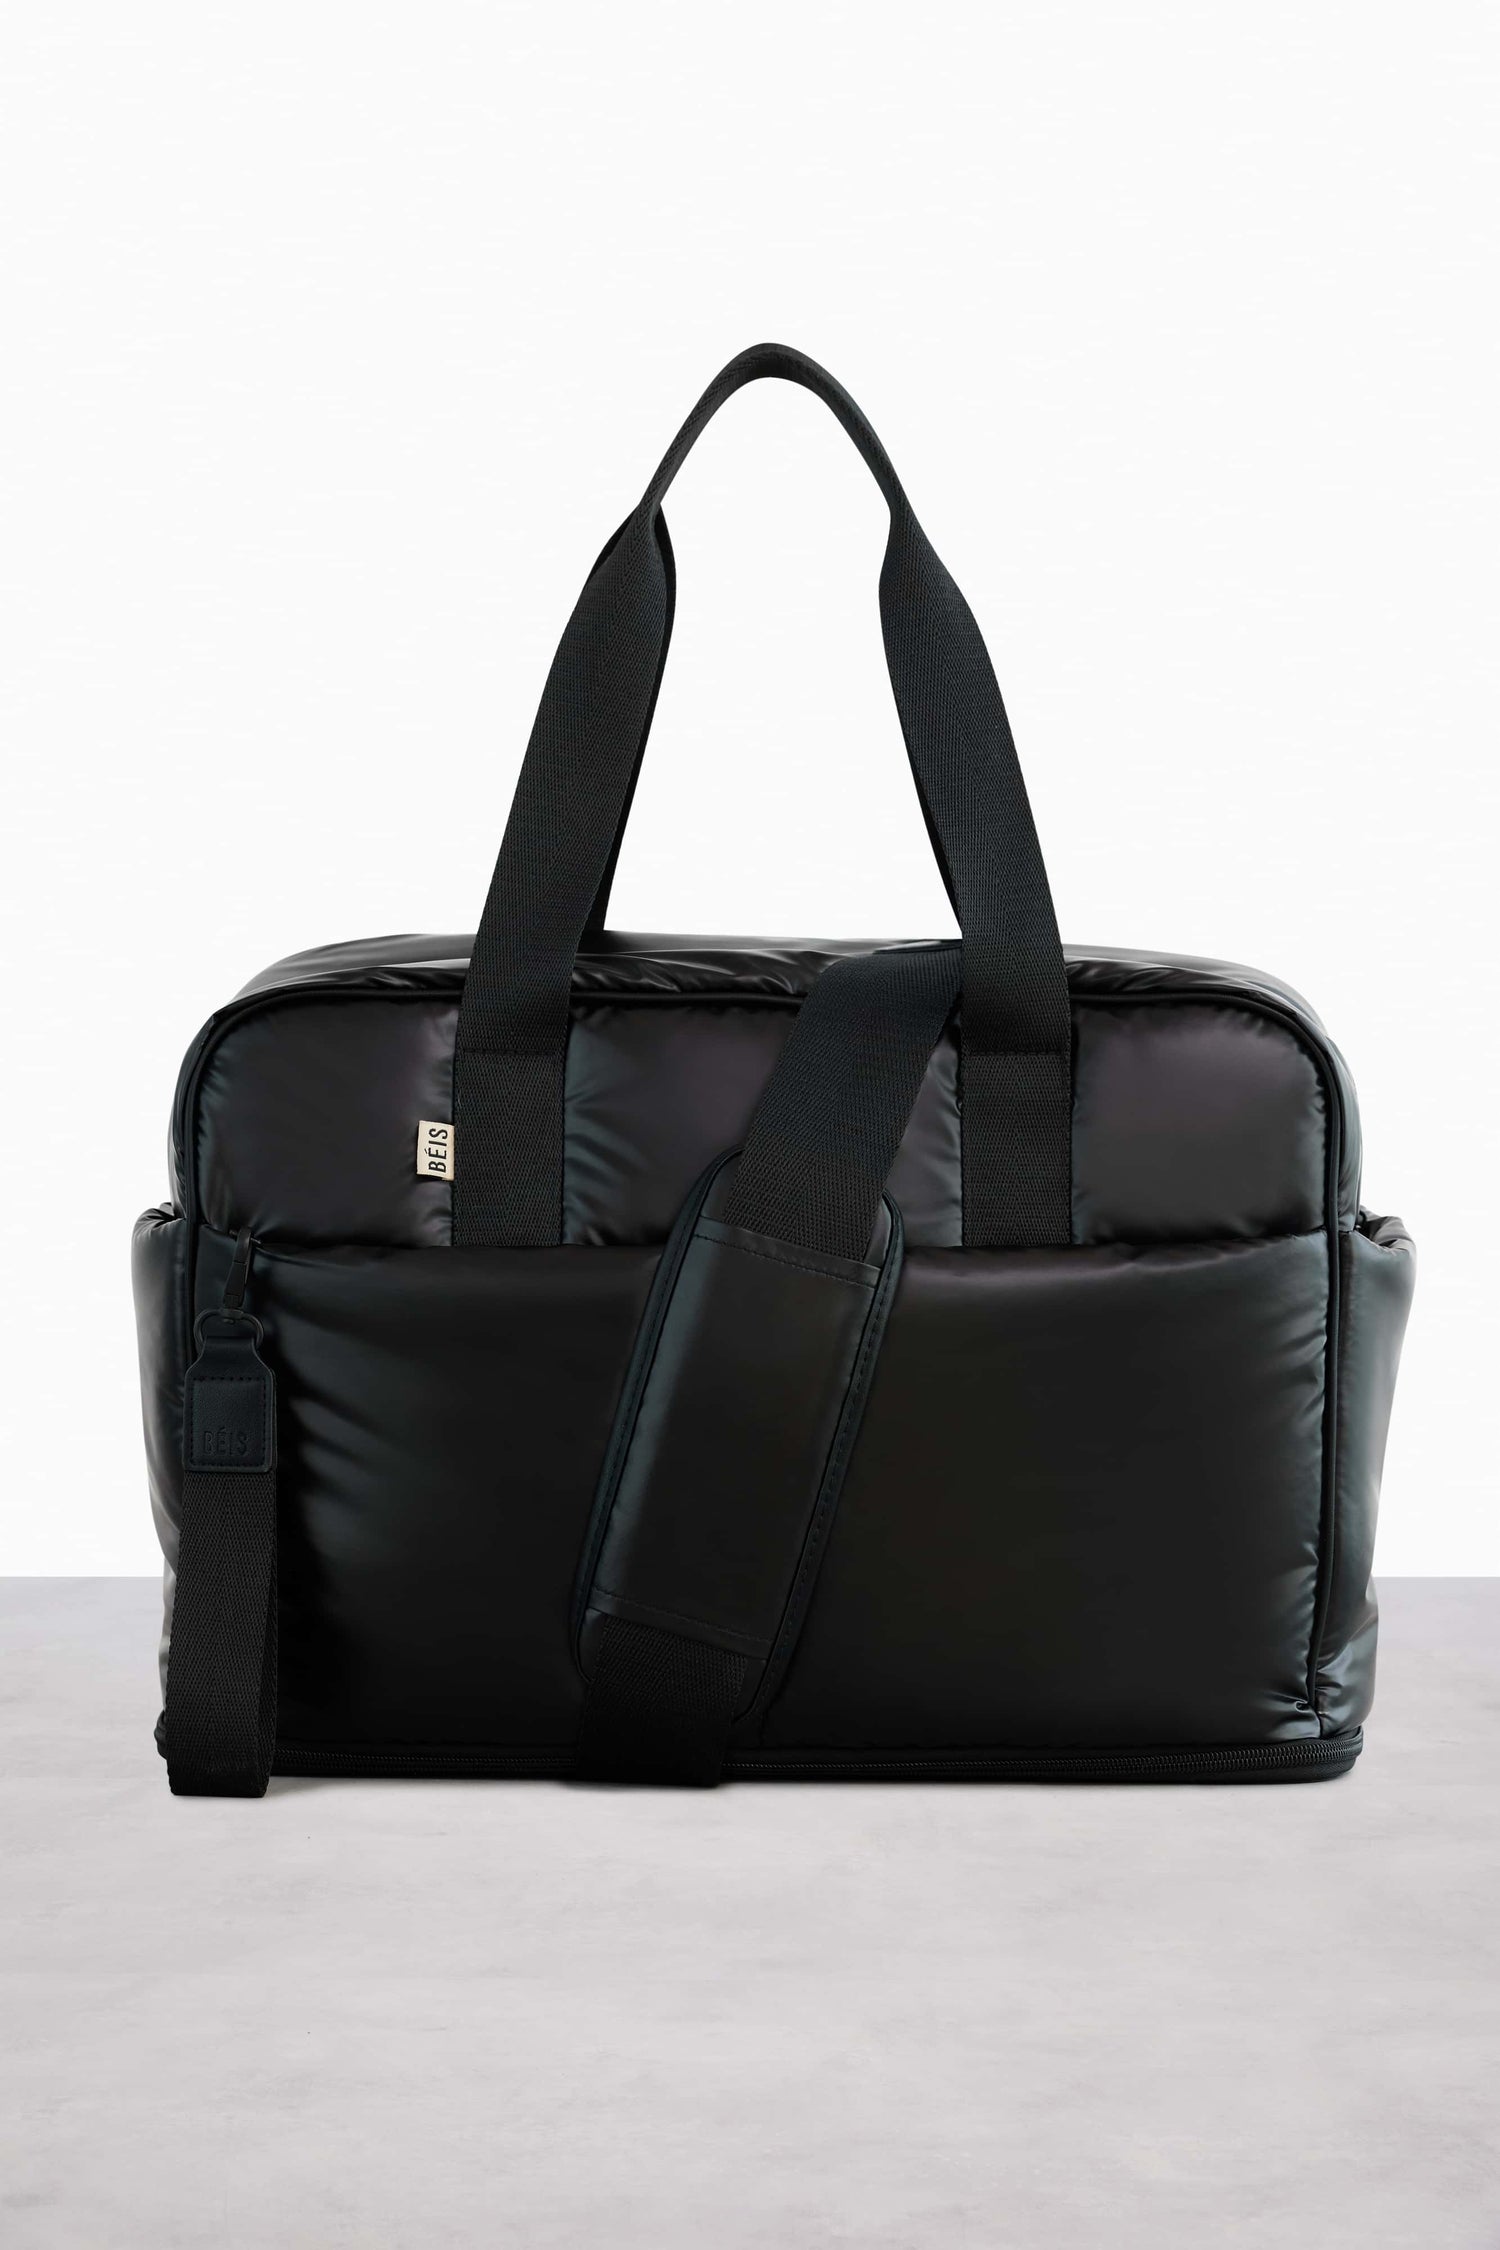 The Expandable Duffle